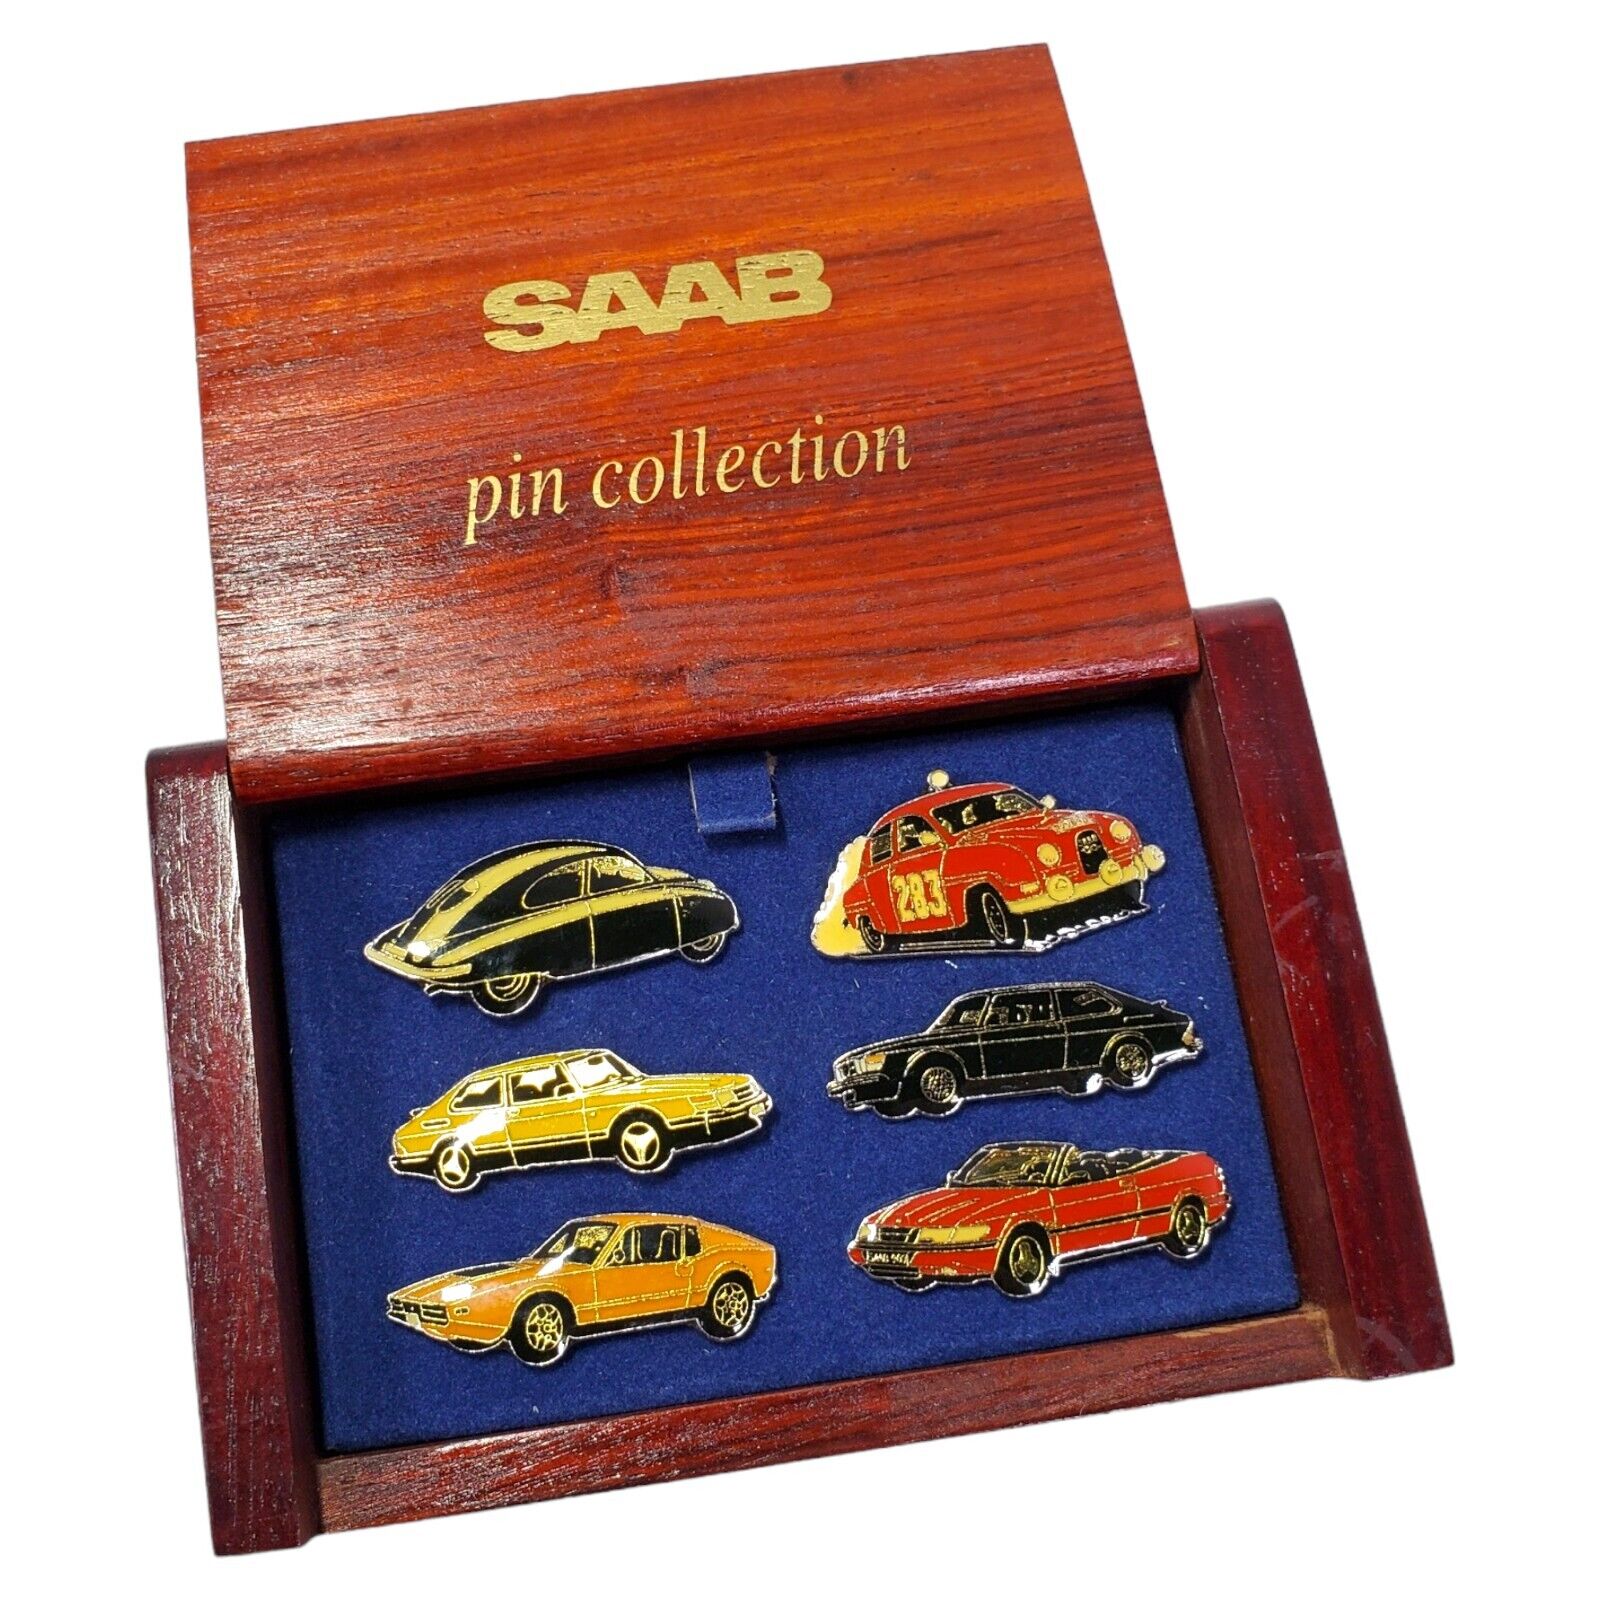 SAAB Enameled Lapel Pins From 1998 SAAB Owners Convention